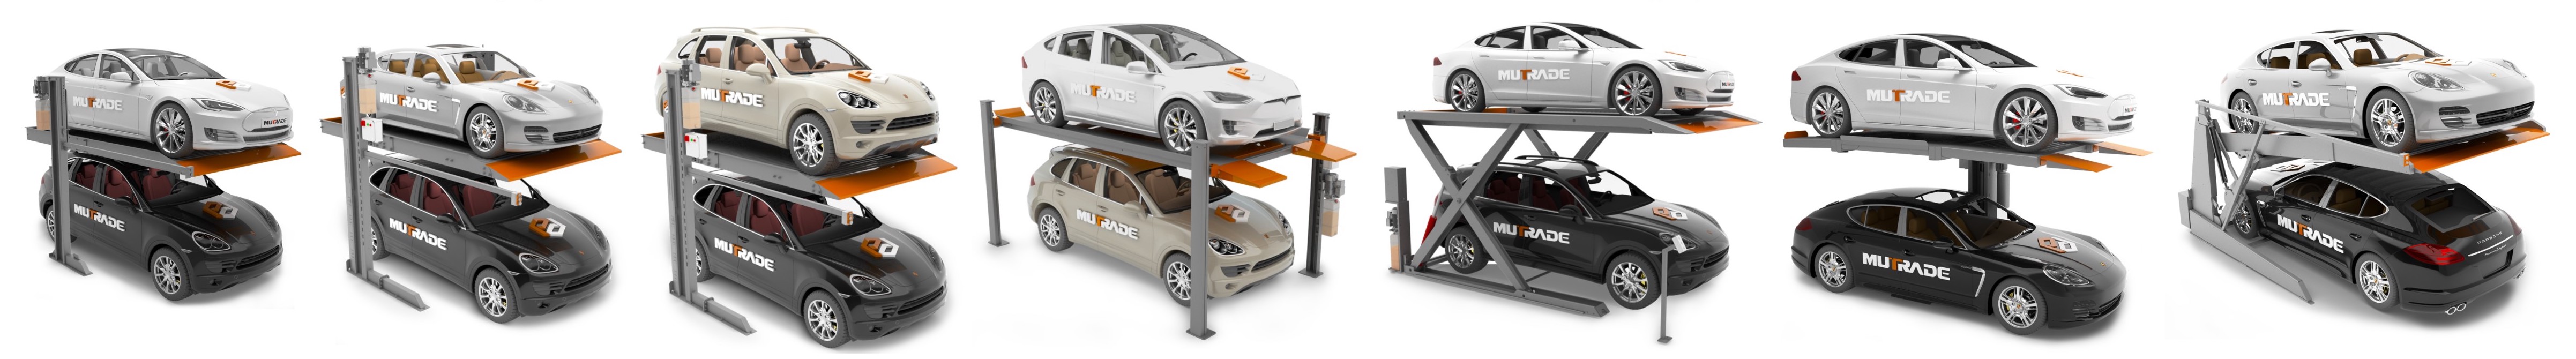 parking lift CHOOSING THE RIGHT PARKING EQUIPMENT: A COMPREHENSIVE GUIDE FROM MUTRADE